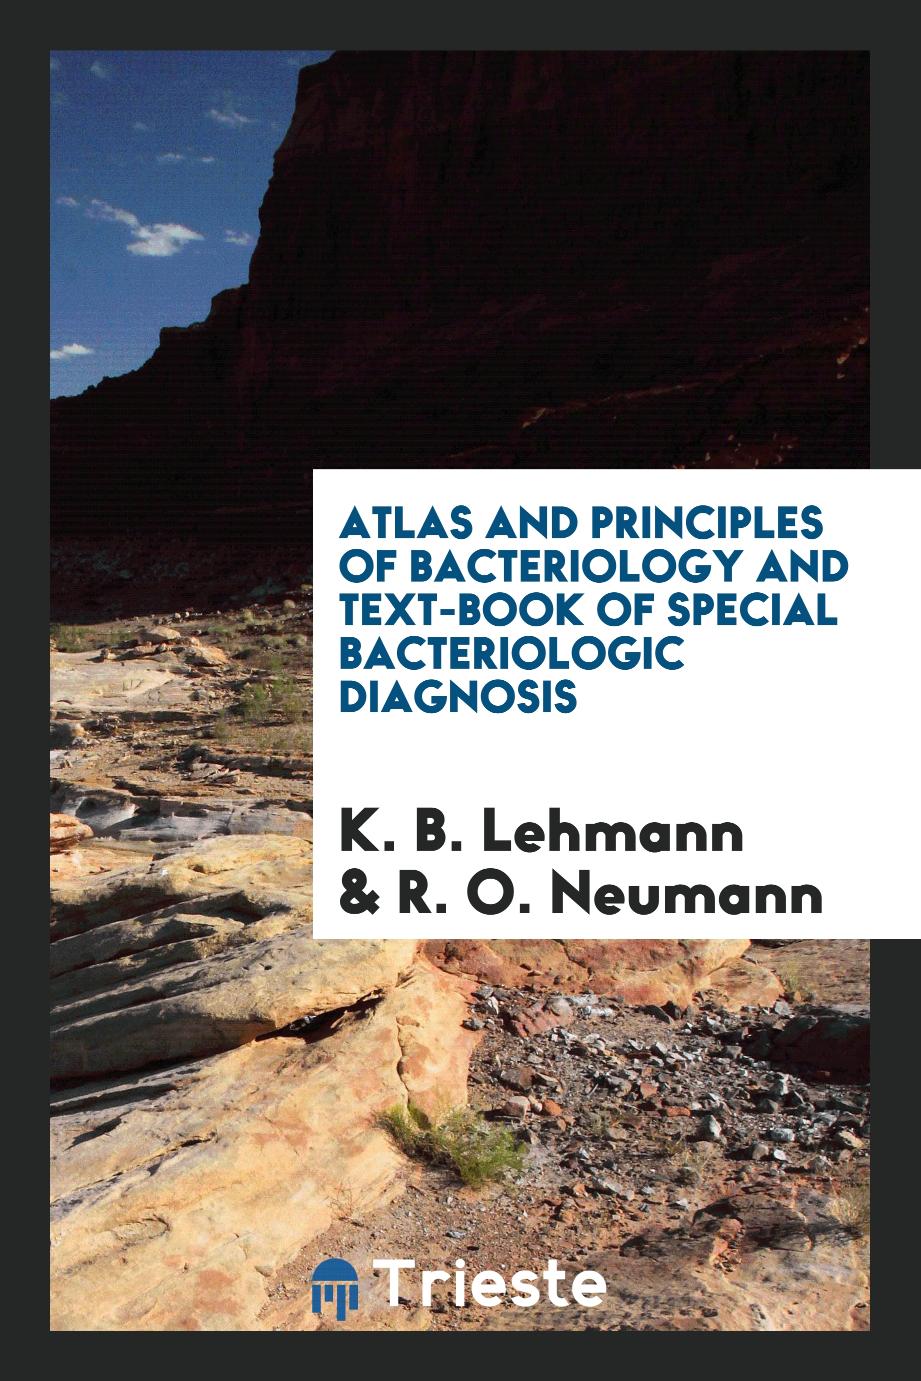 Atlas and principles of bacteriology and text-book of special bacteriologic diagnosis